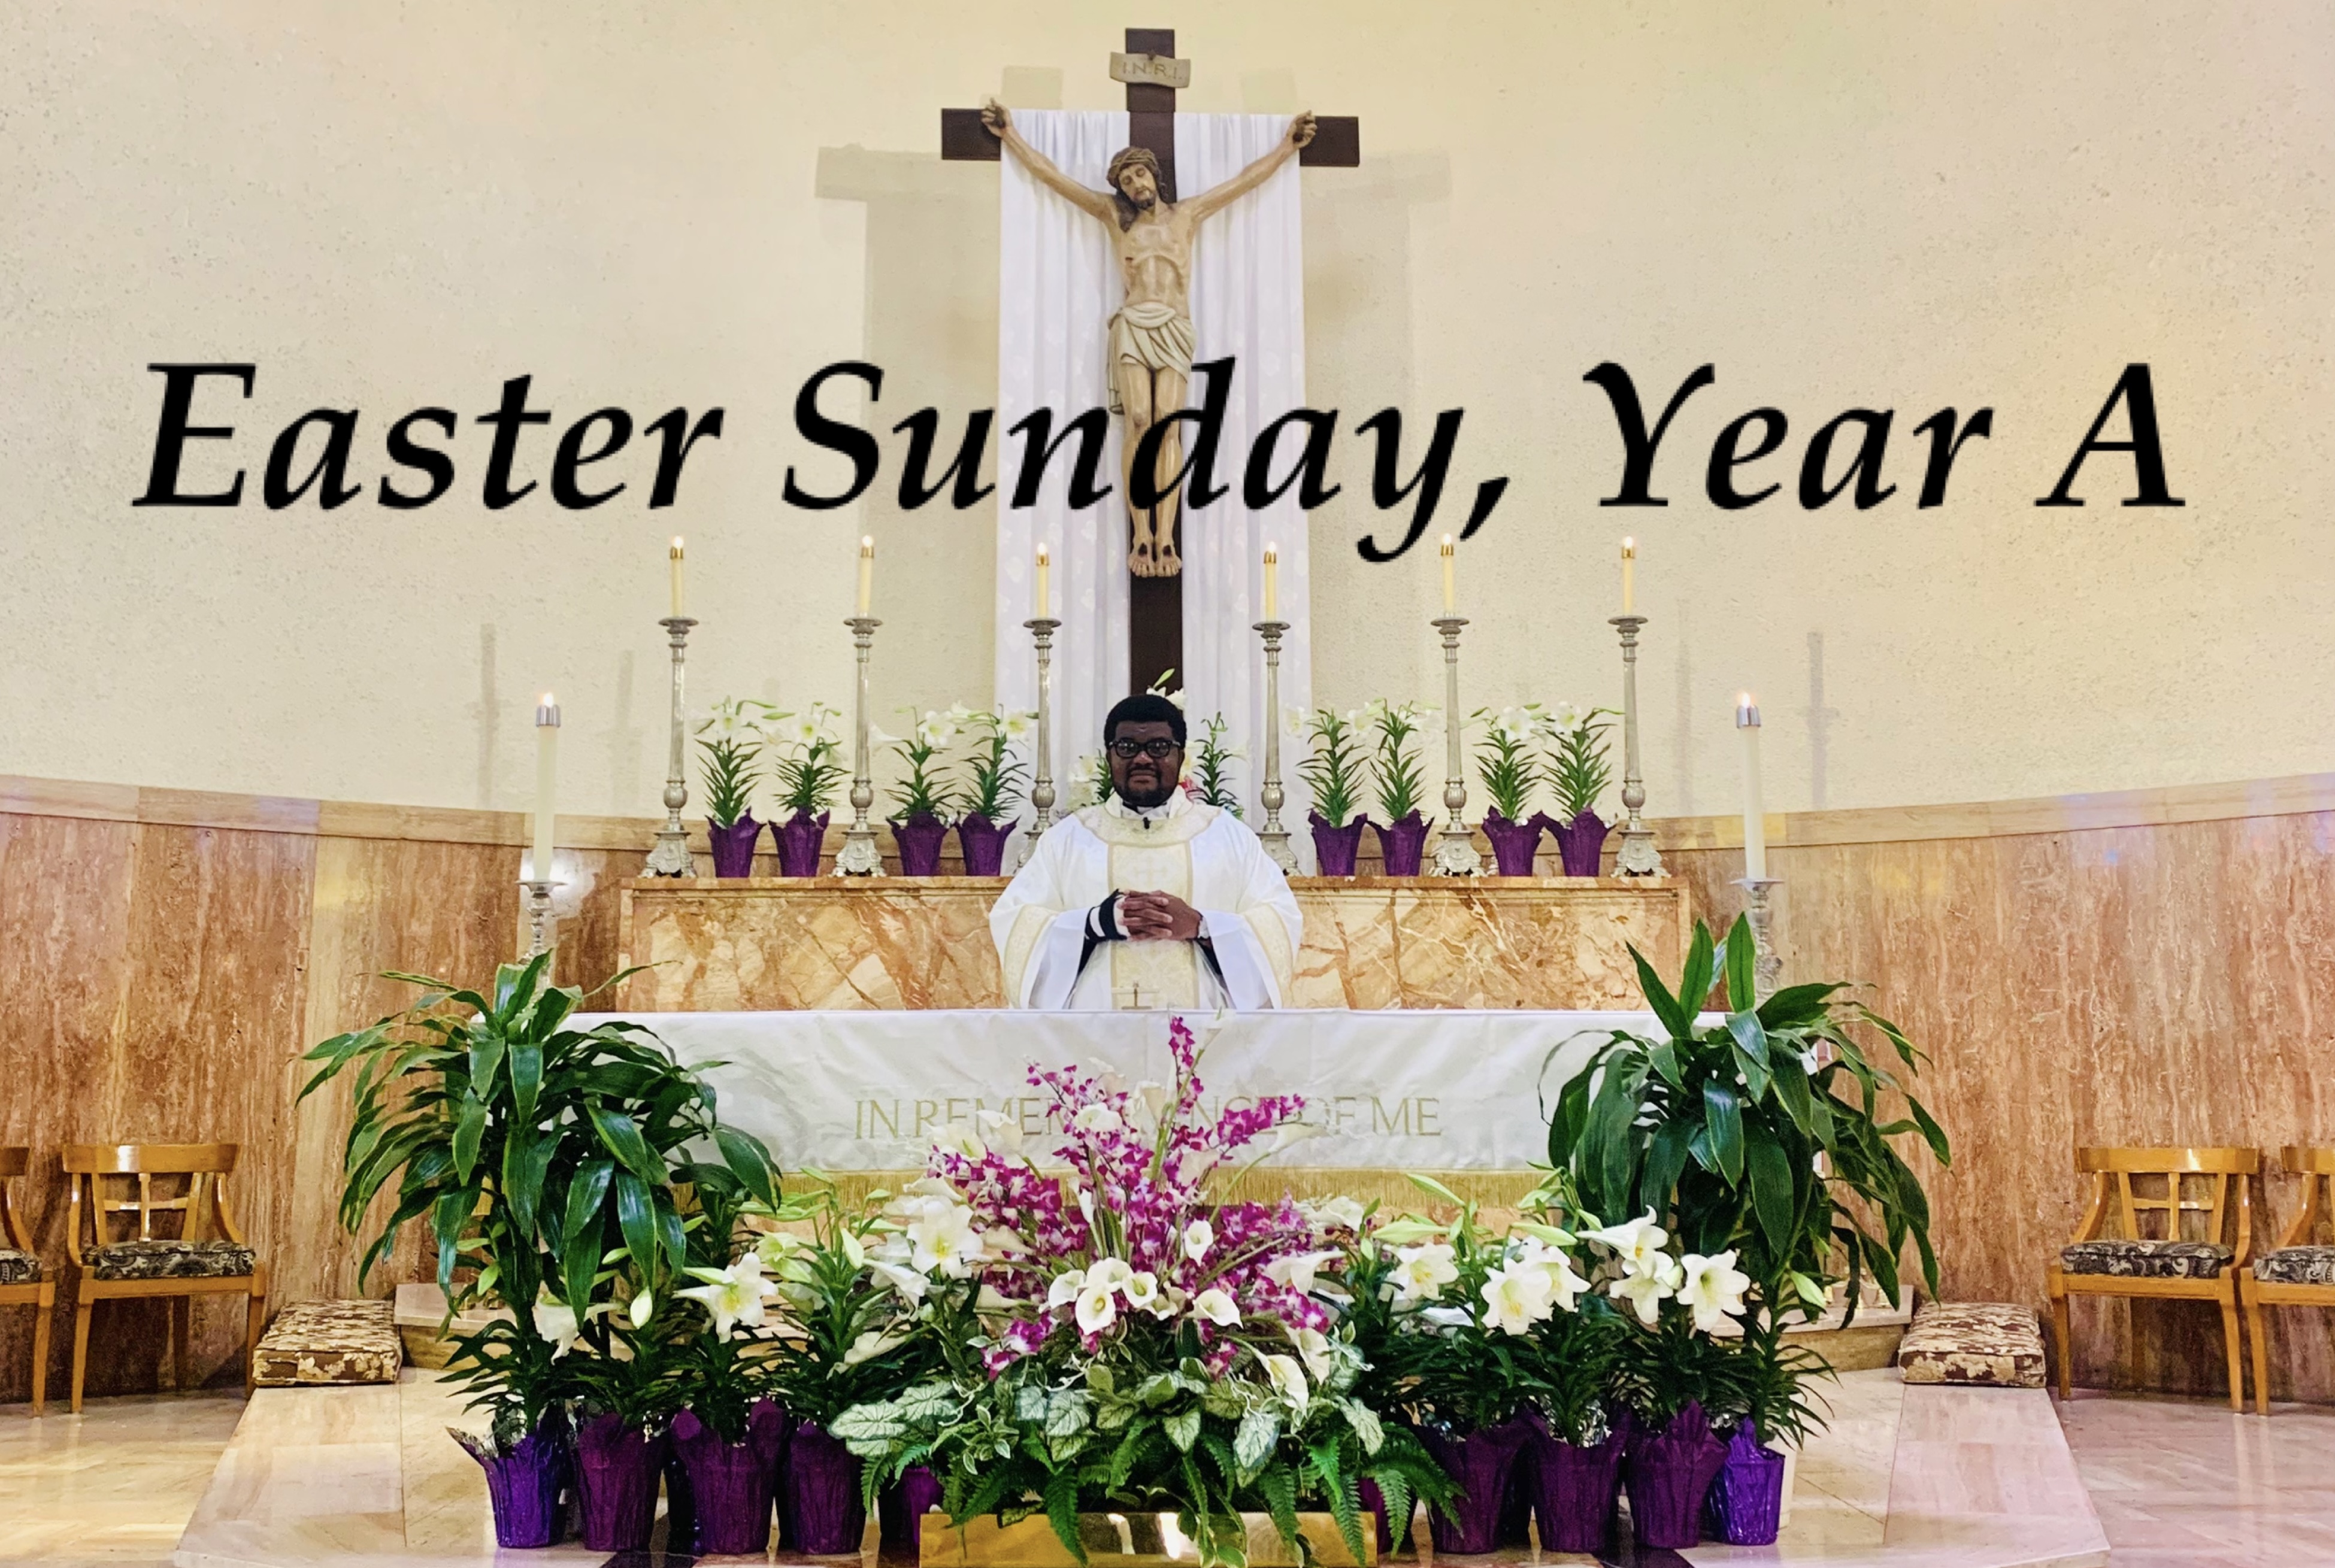 Easter Sunday, Year A